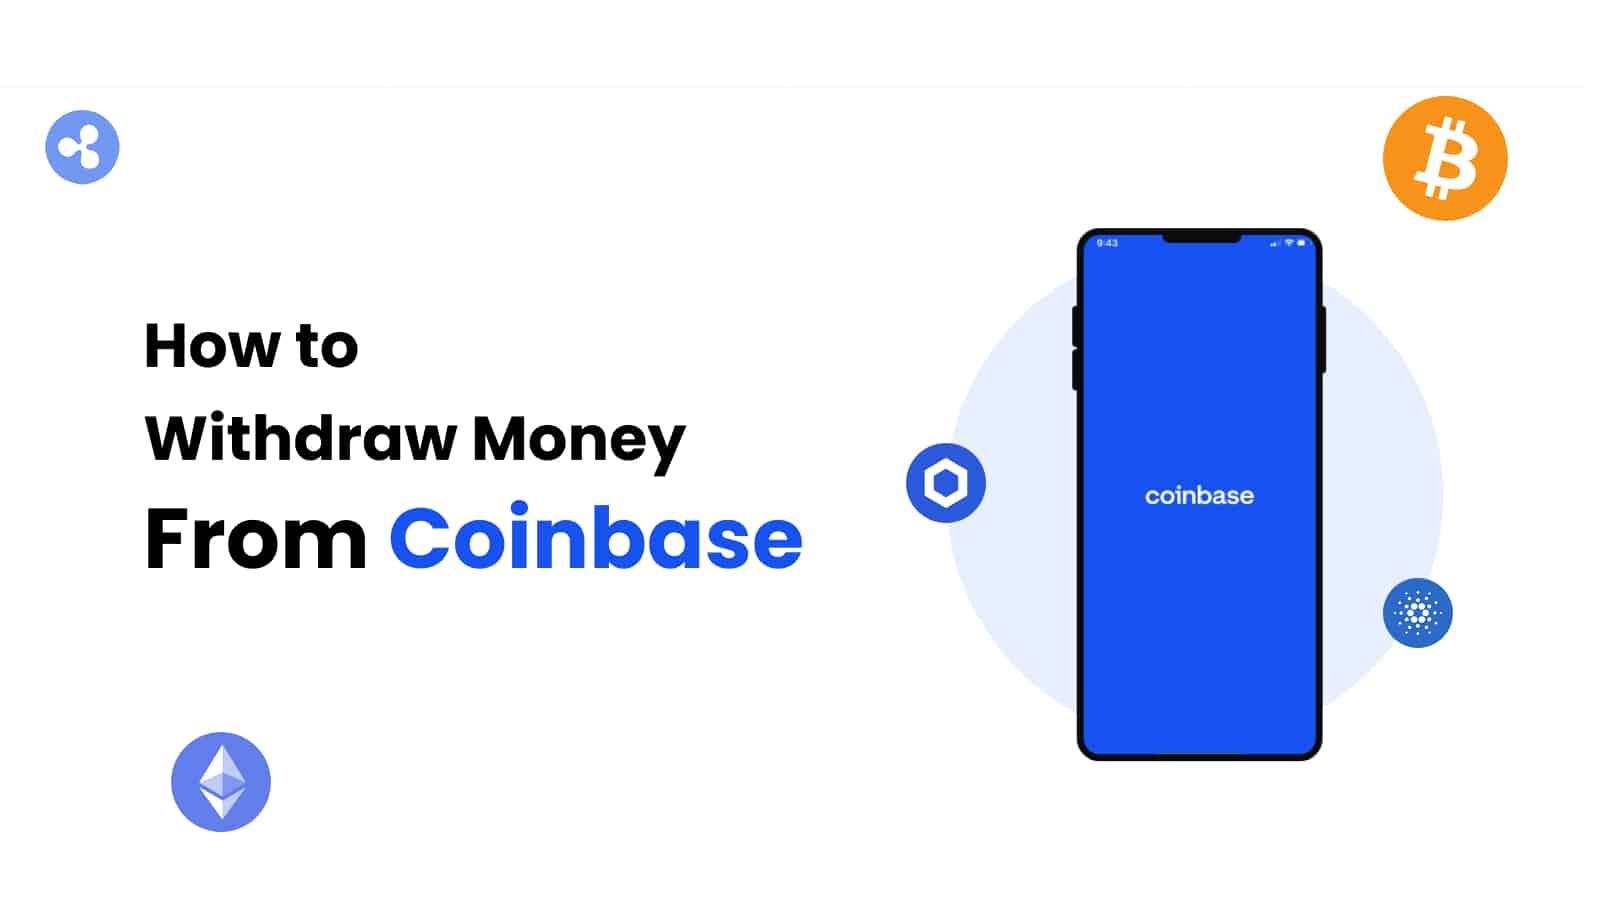 What Are the Withdrawal Limits on Coinbase?